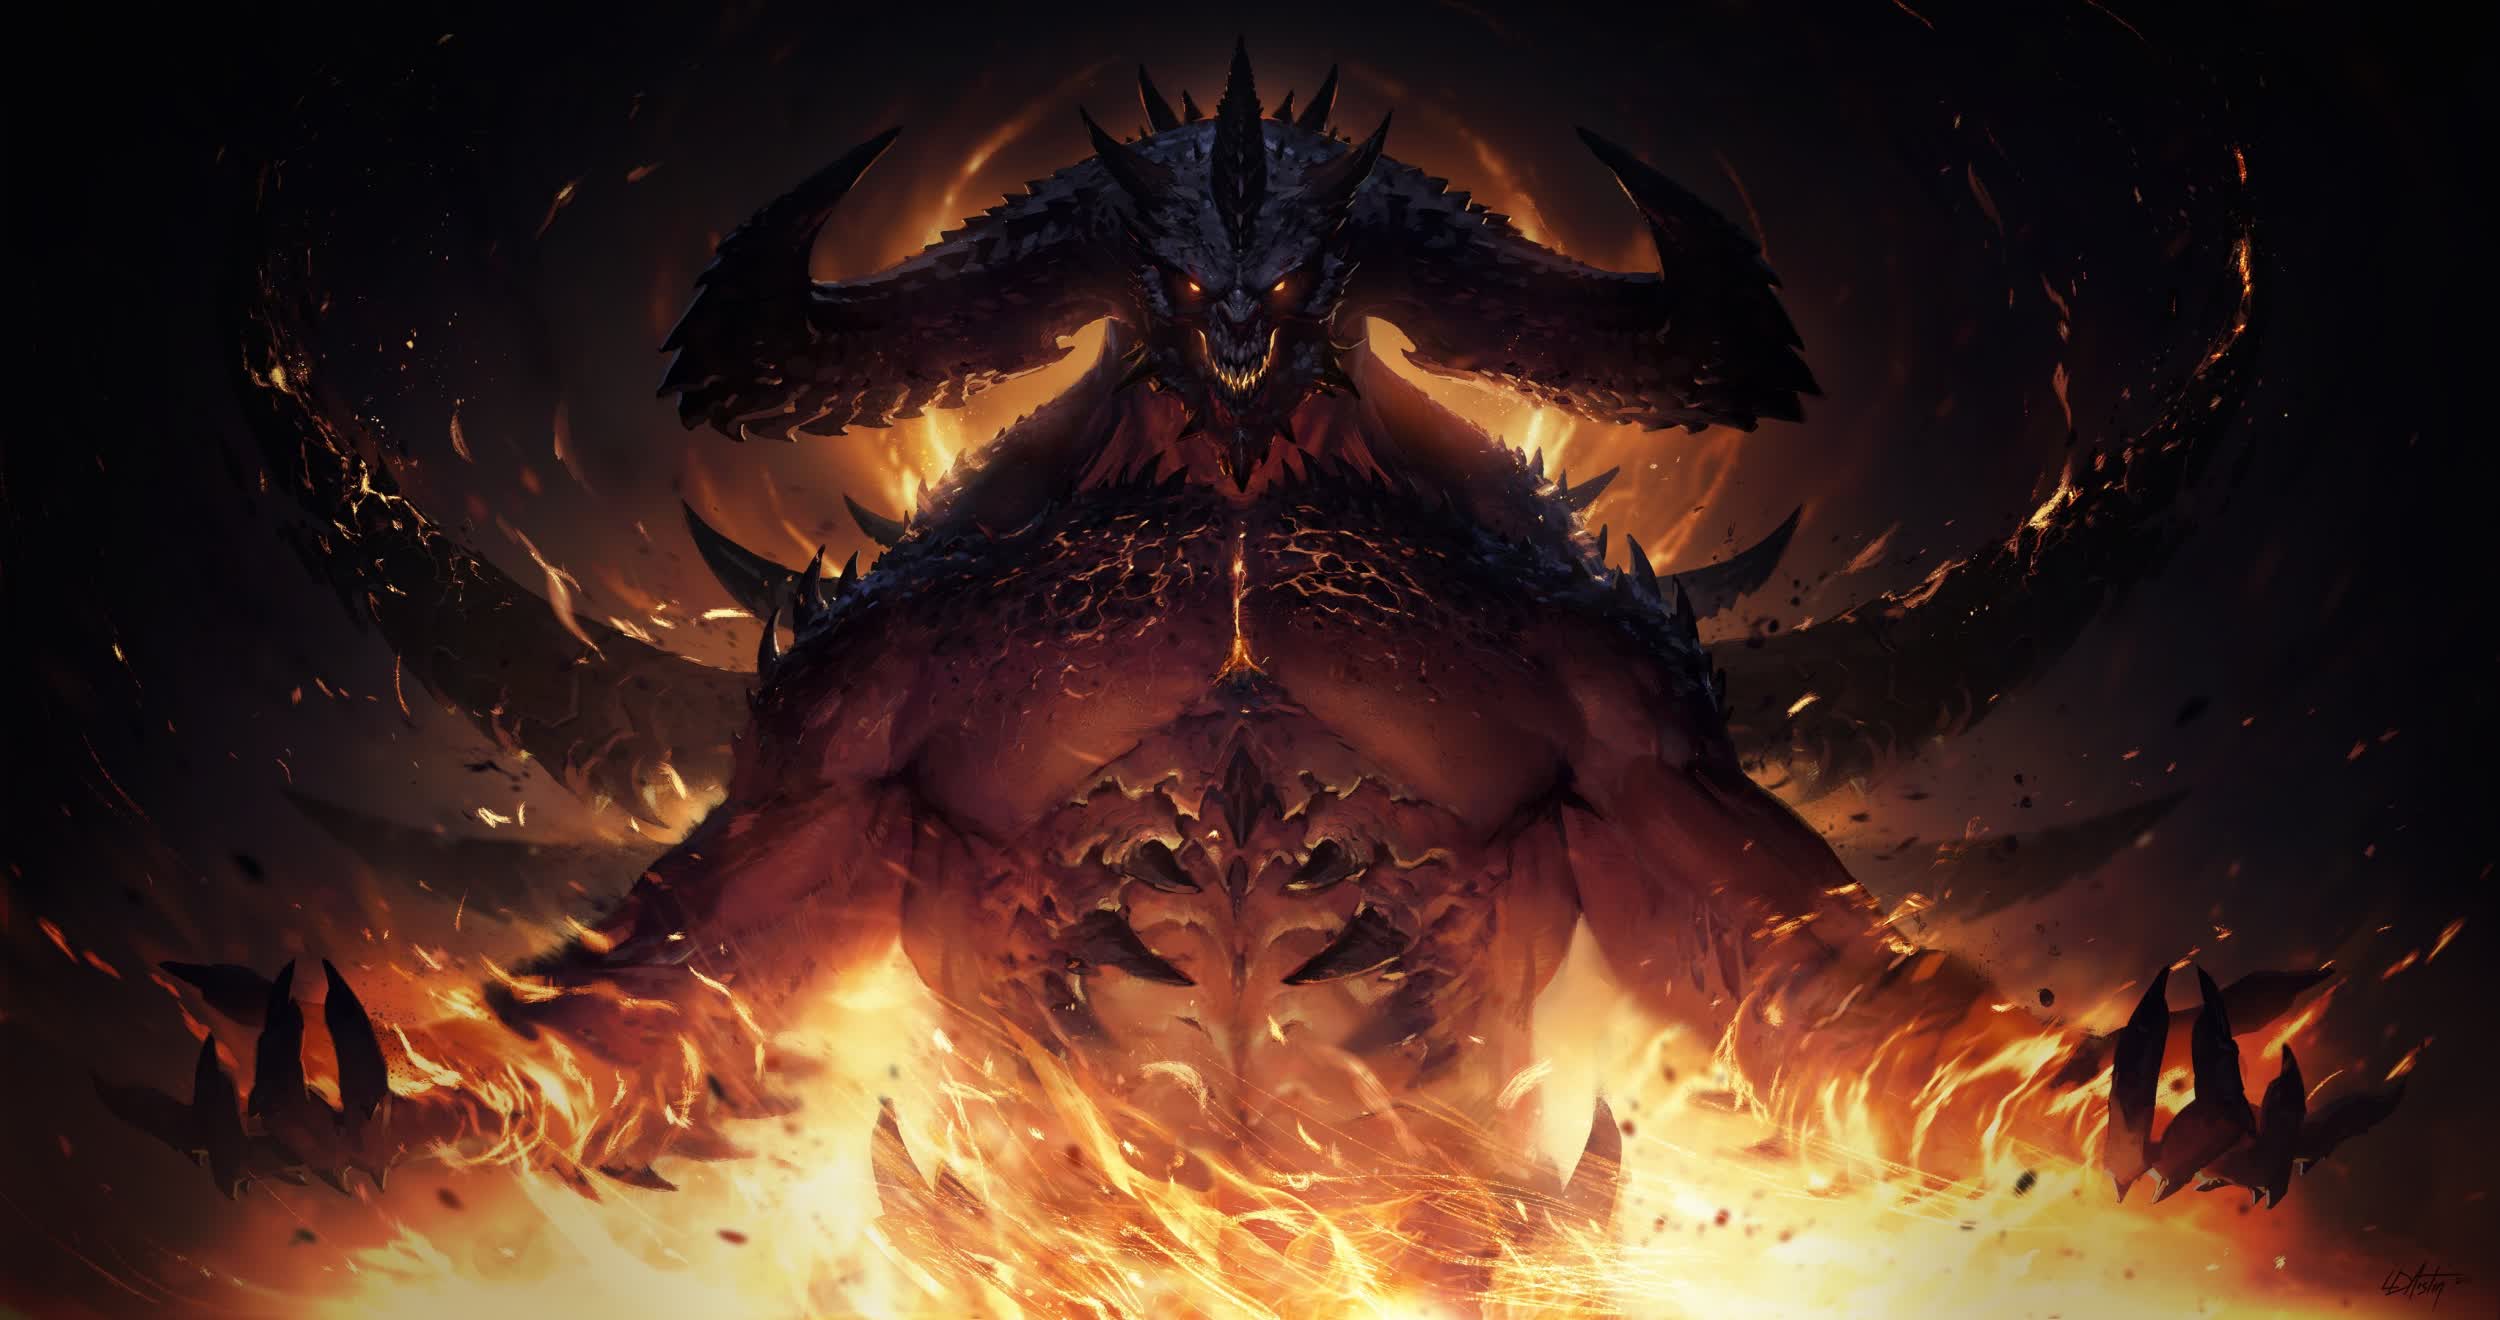 Diablo Immortal player spent $100K to build a character too powerful to match up against others